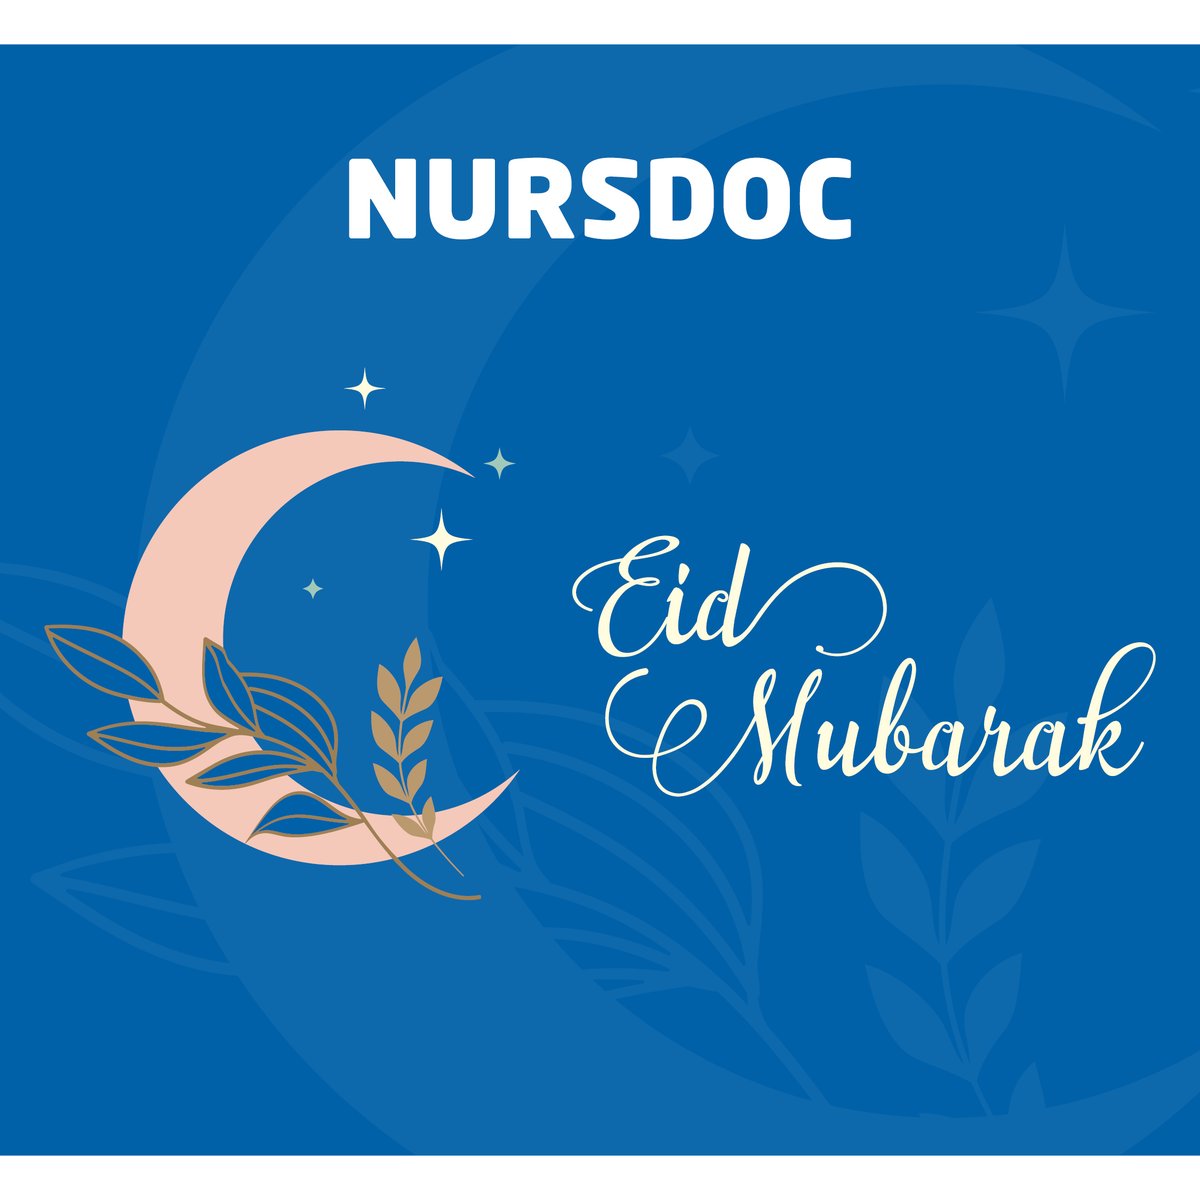 Eid Mubarak to all of our connections and candidates - from the team at Nursdoc 🌙

May this Eid bring happiness, peace, blessings and prosperity! 🙌🏻

#Nursdoc #EidMubarak #Eid2023 #Ramadan2023